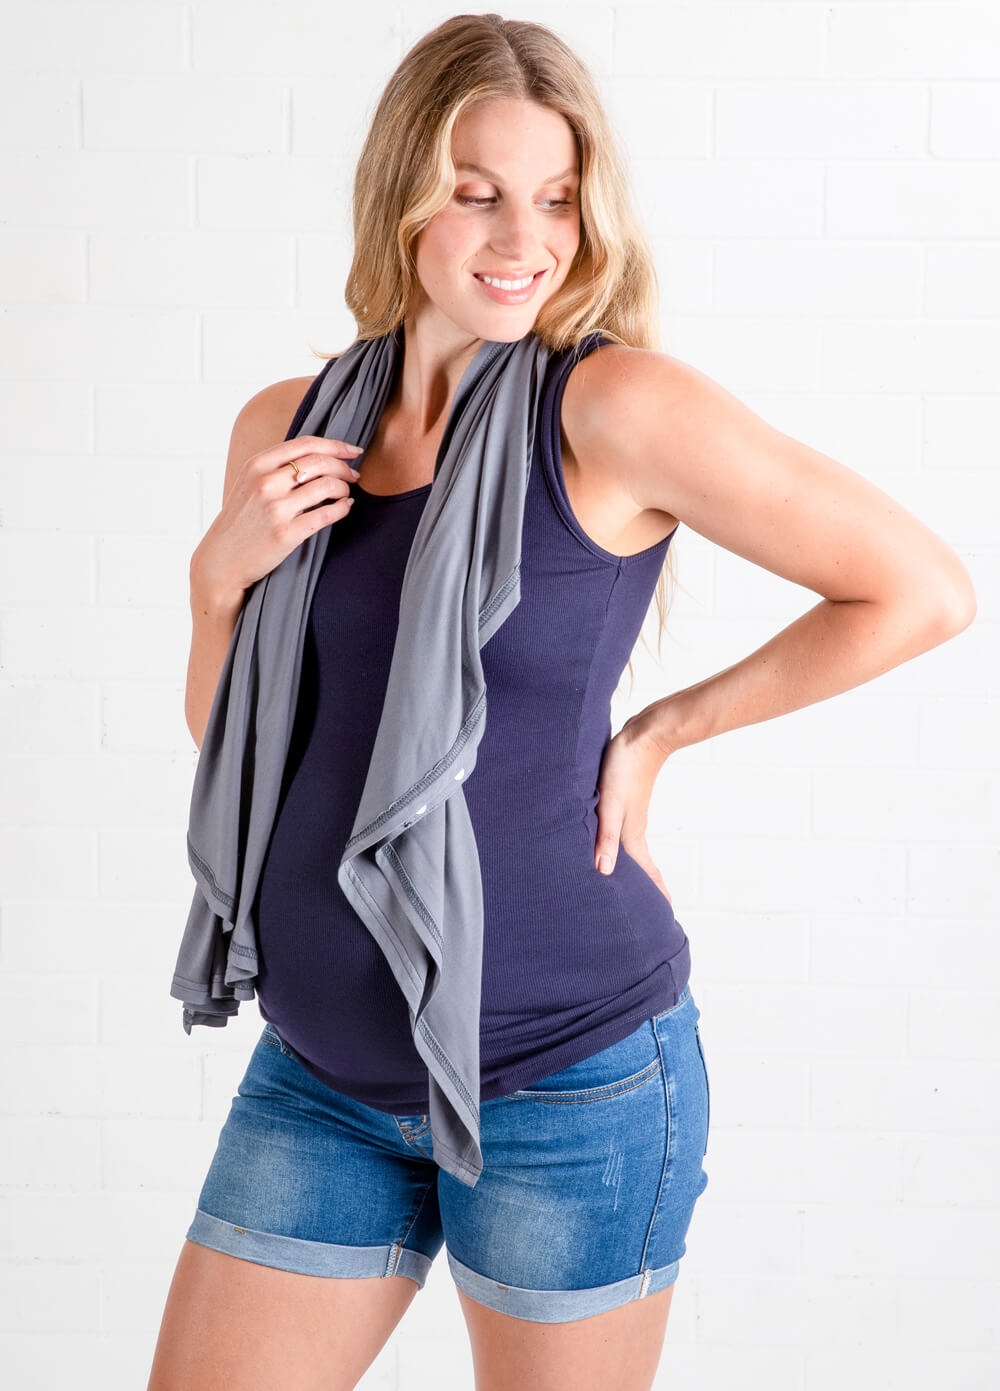 Lait & Co - Memoire Nursing Cover Shawl in Charcoal | Queen Bee